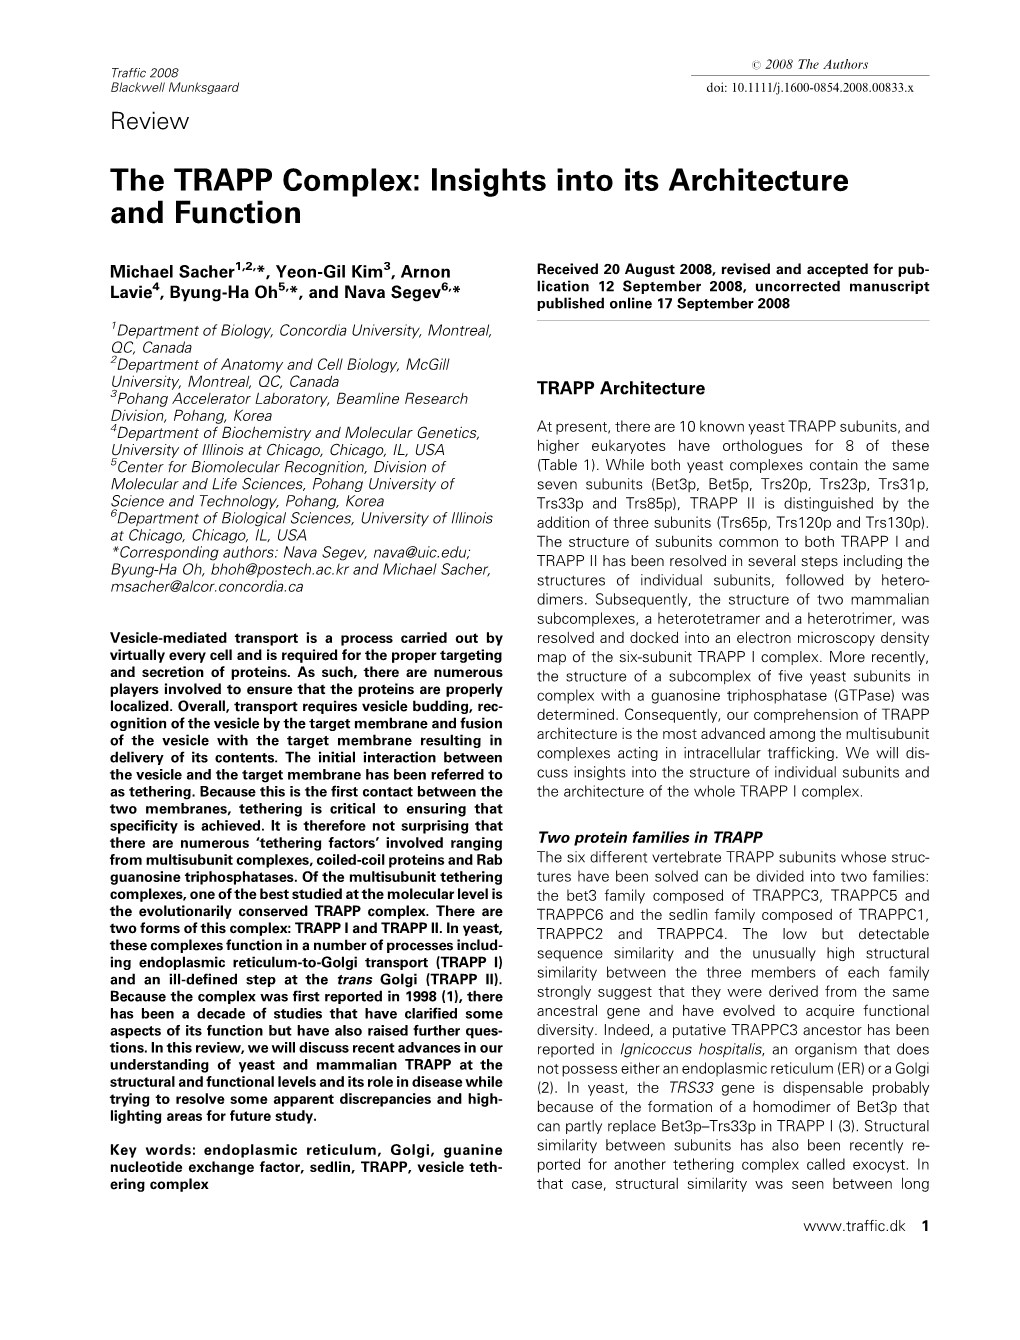 The TRAPP Complex: Insights Into Its Architecture and Function